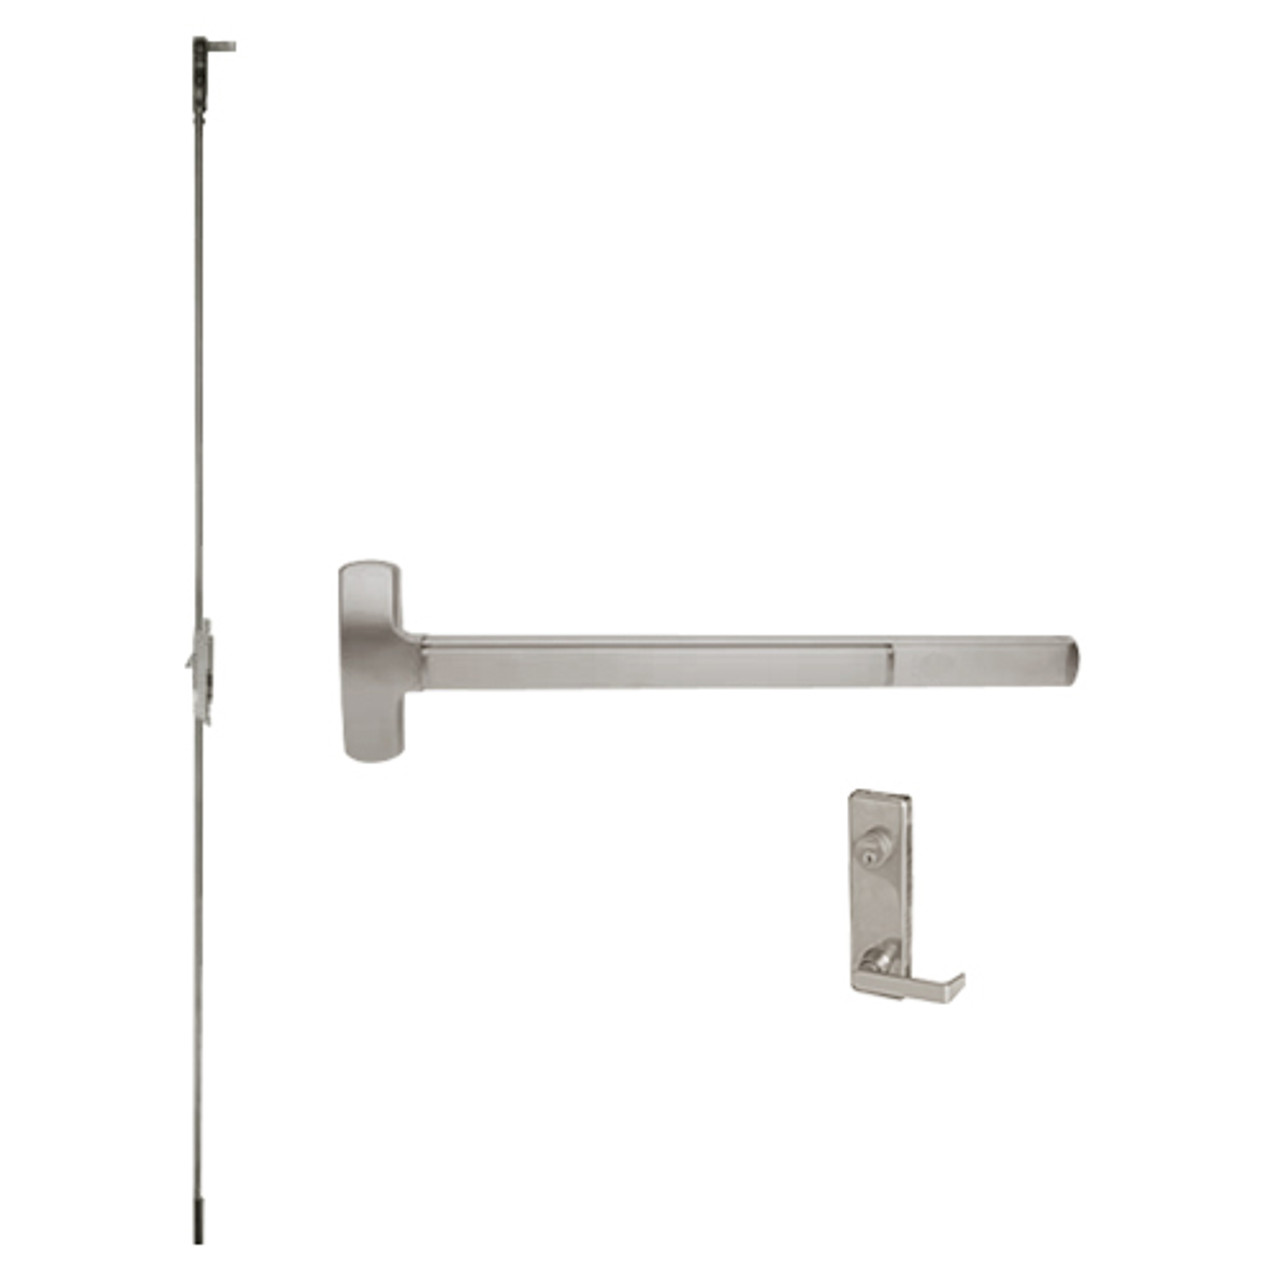 F-25-C-L-DANE-US32D-2-LHR Falcon Exit Device in Satin Stainless Steel